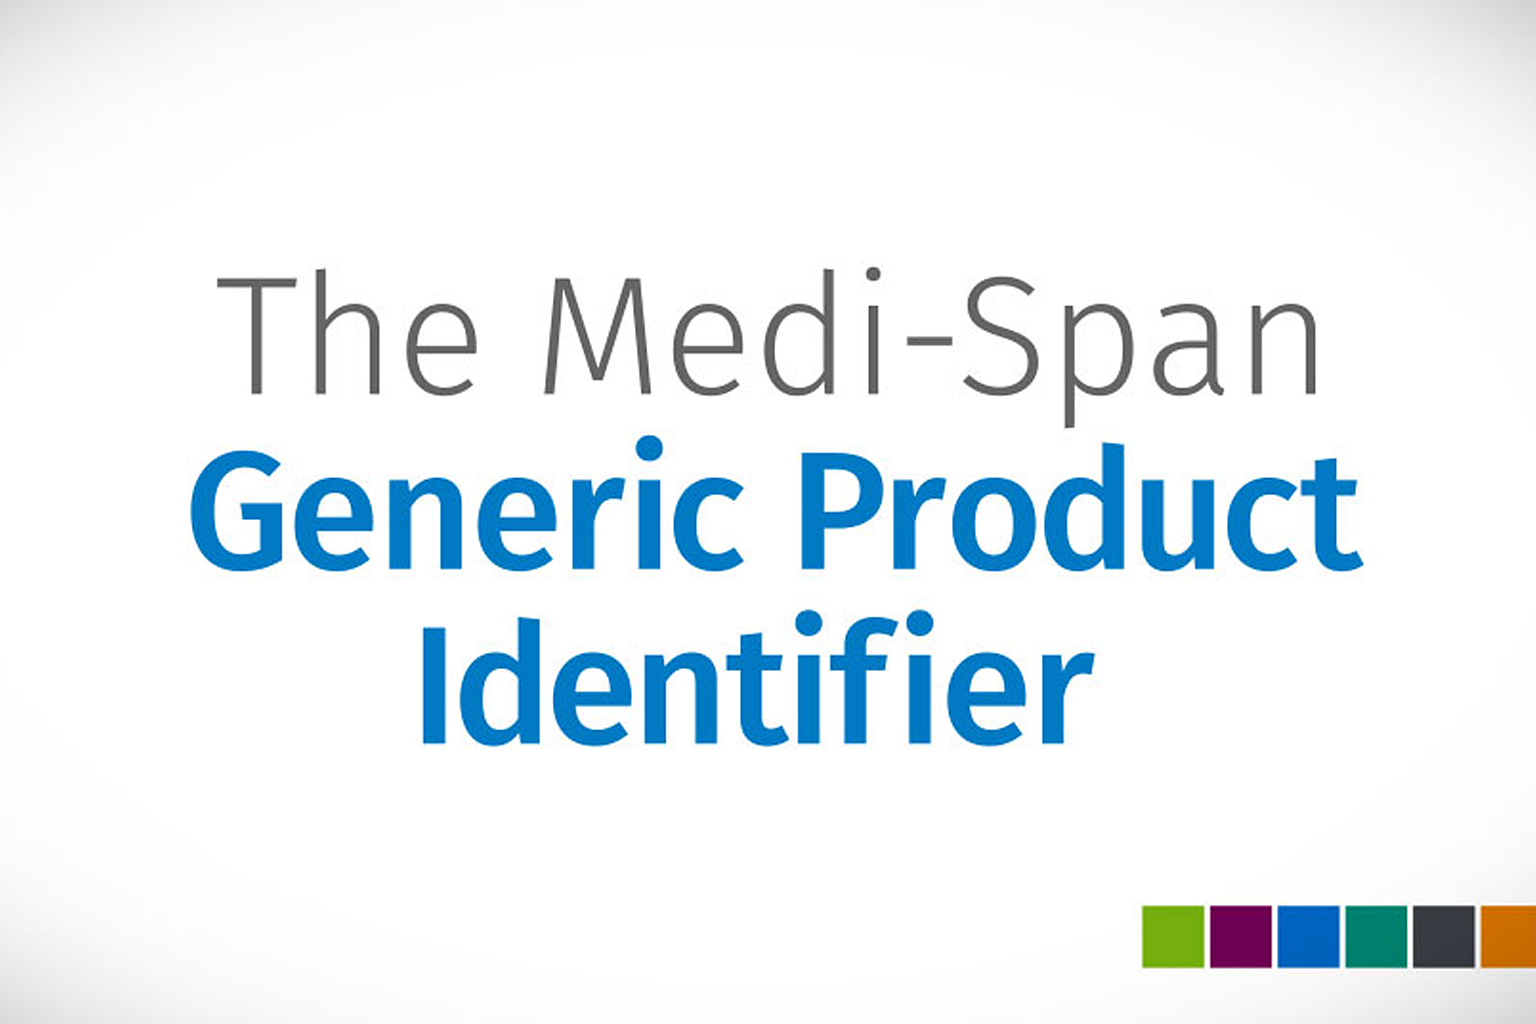 Noisy journal robbery About - Generic Product Identifier | Medi-Span | Wolters Kluwer